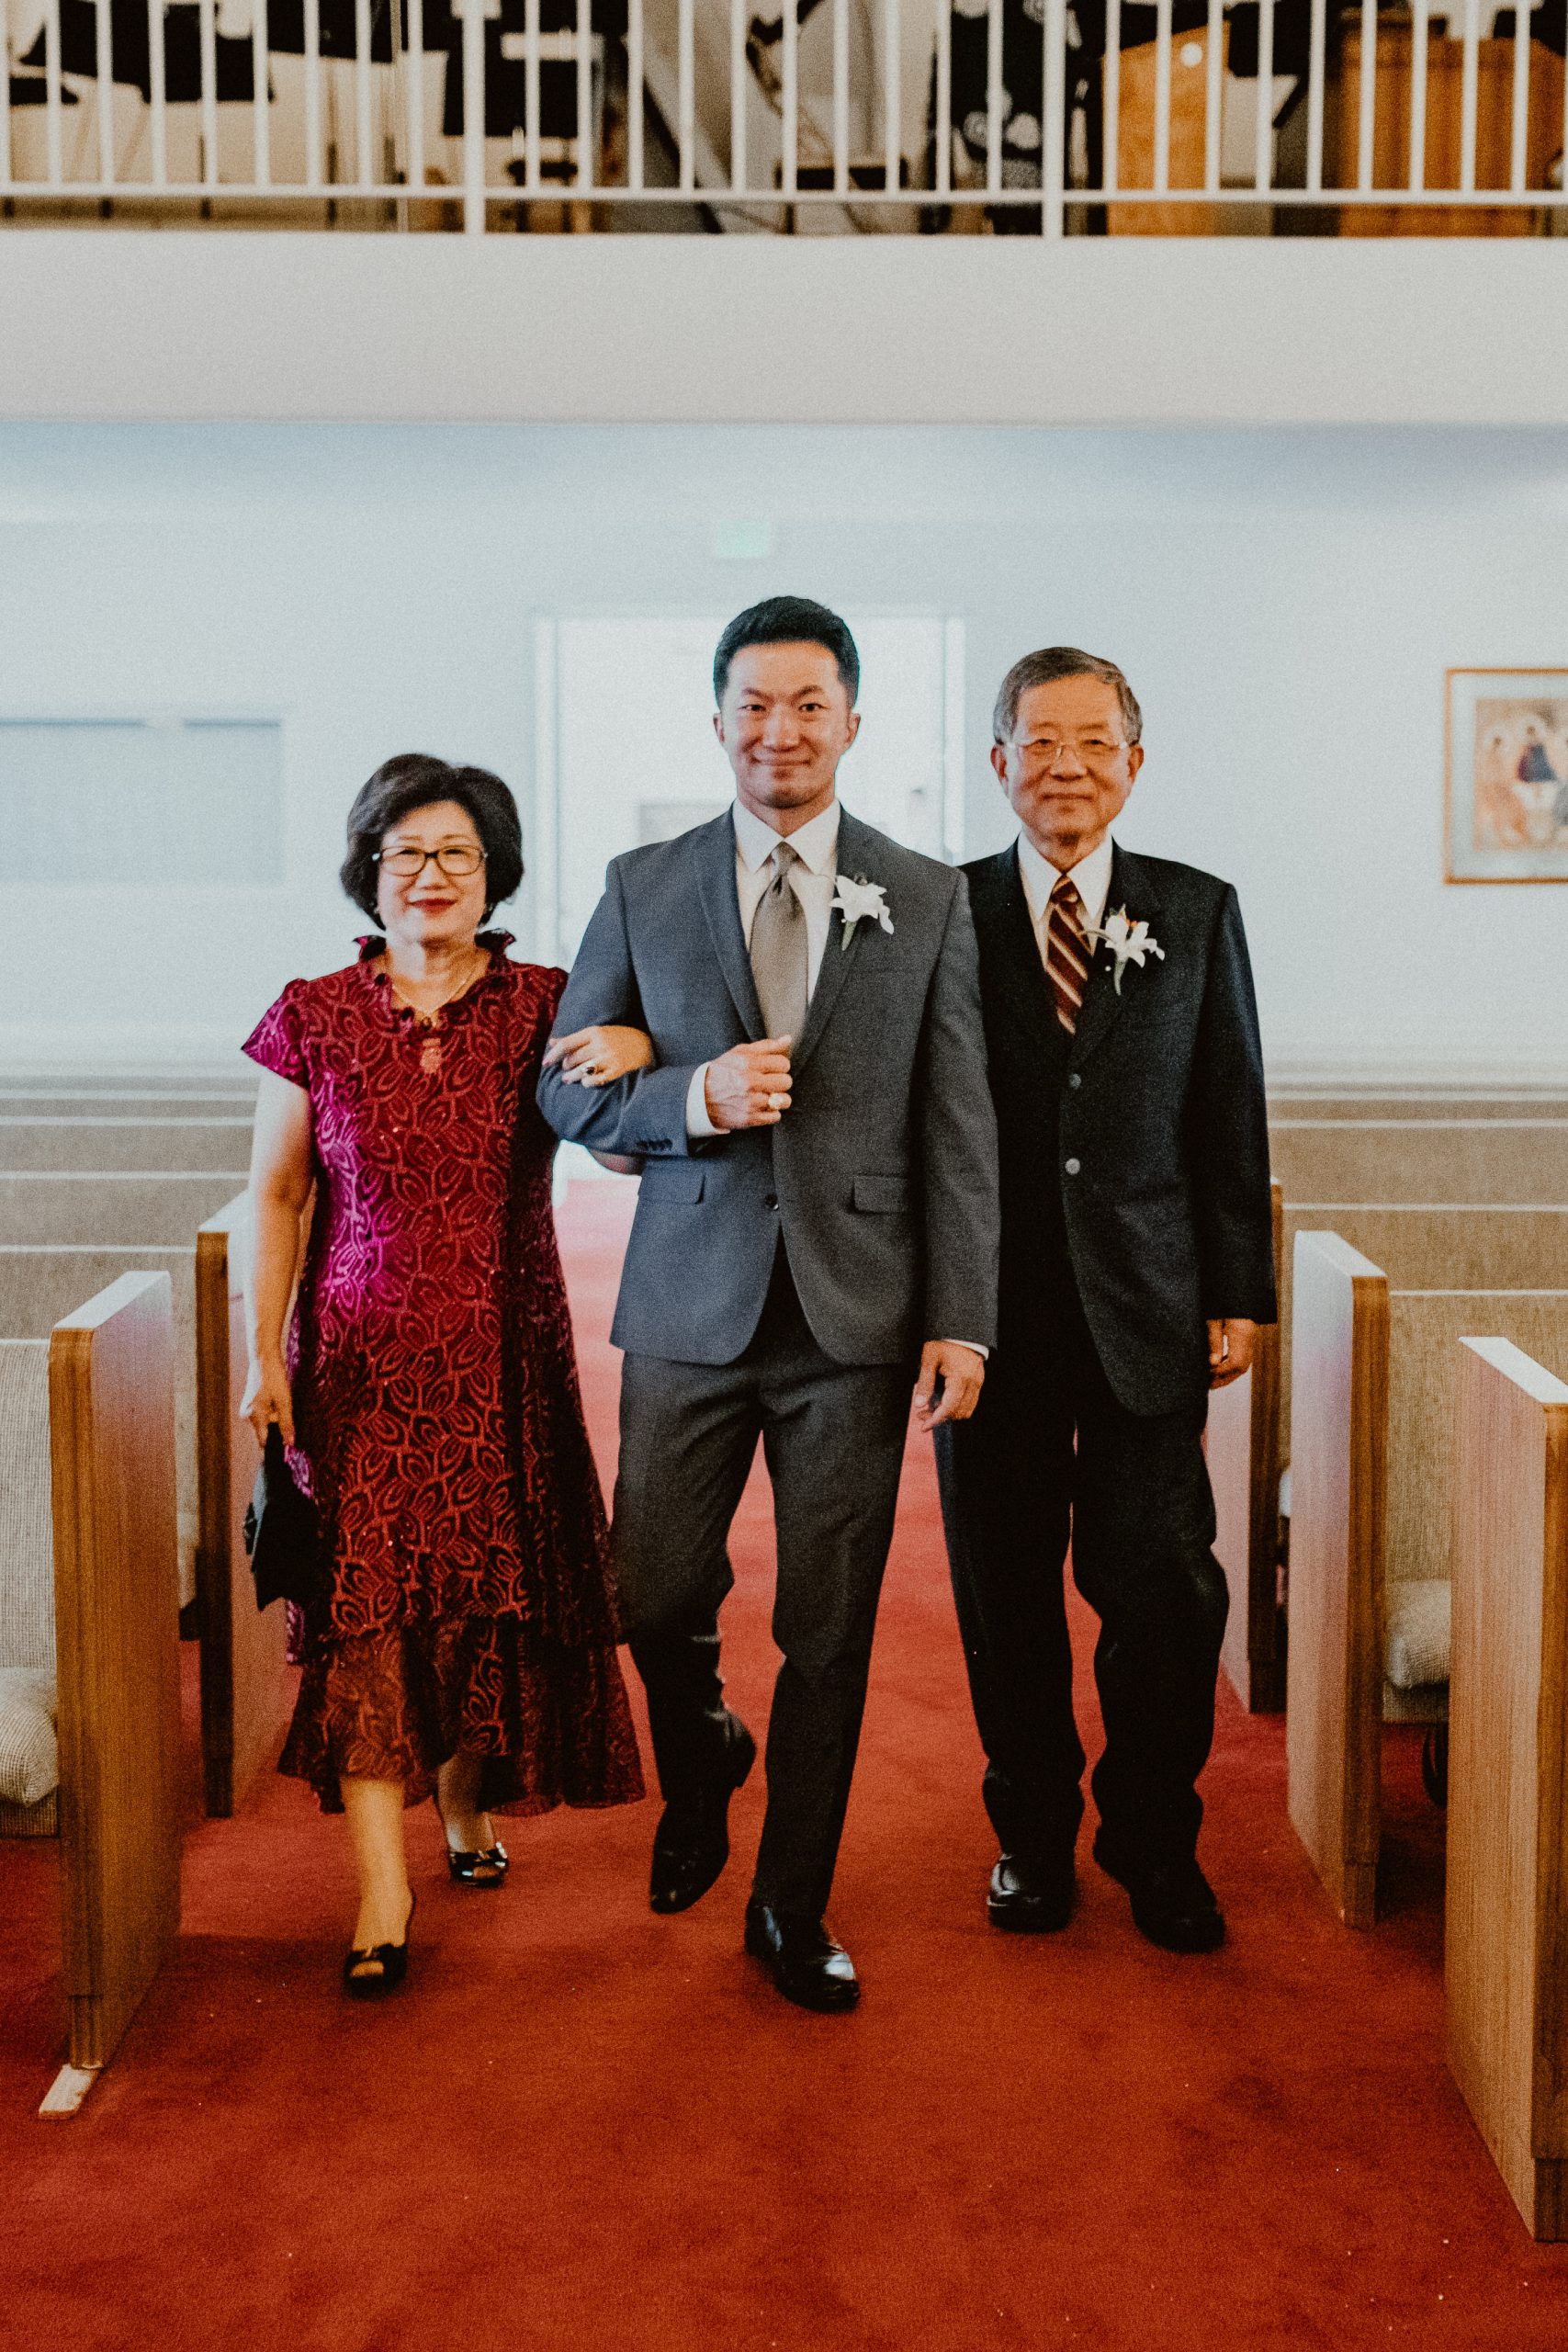 Groom walks down the aisle in a blue-grey suit with his mother wearing a maroon colored dress and his father with a black suit and boutonniere pin 